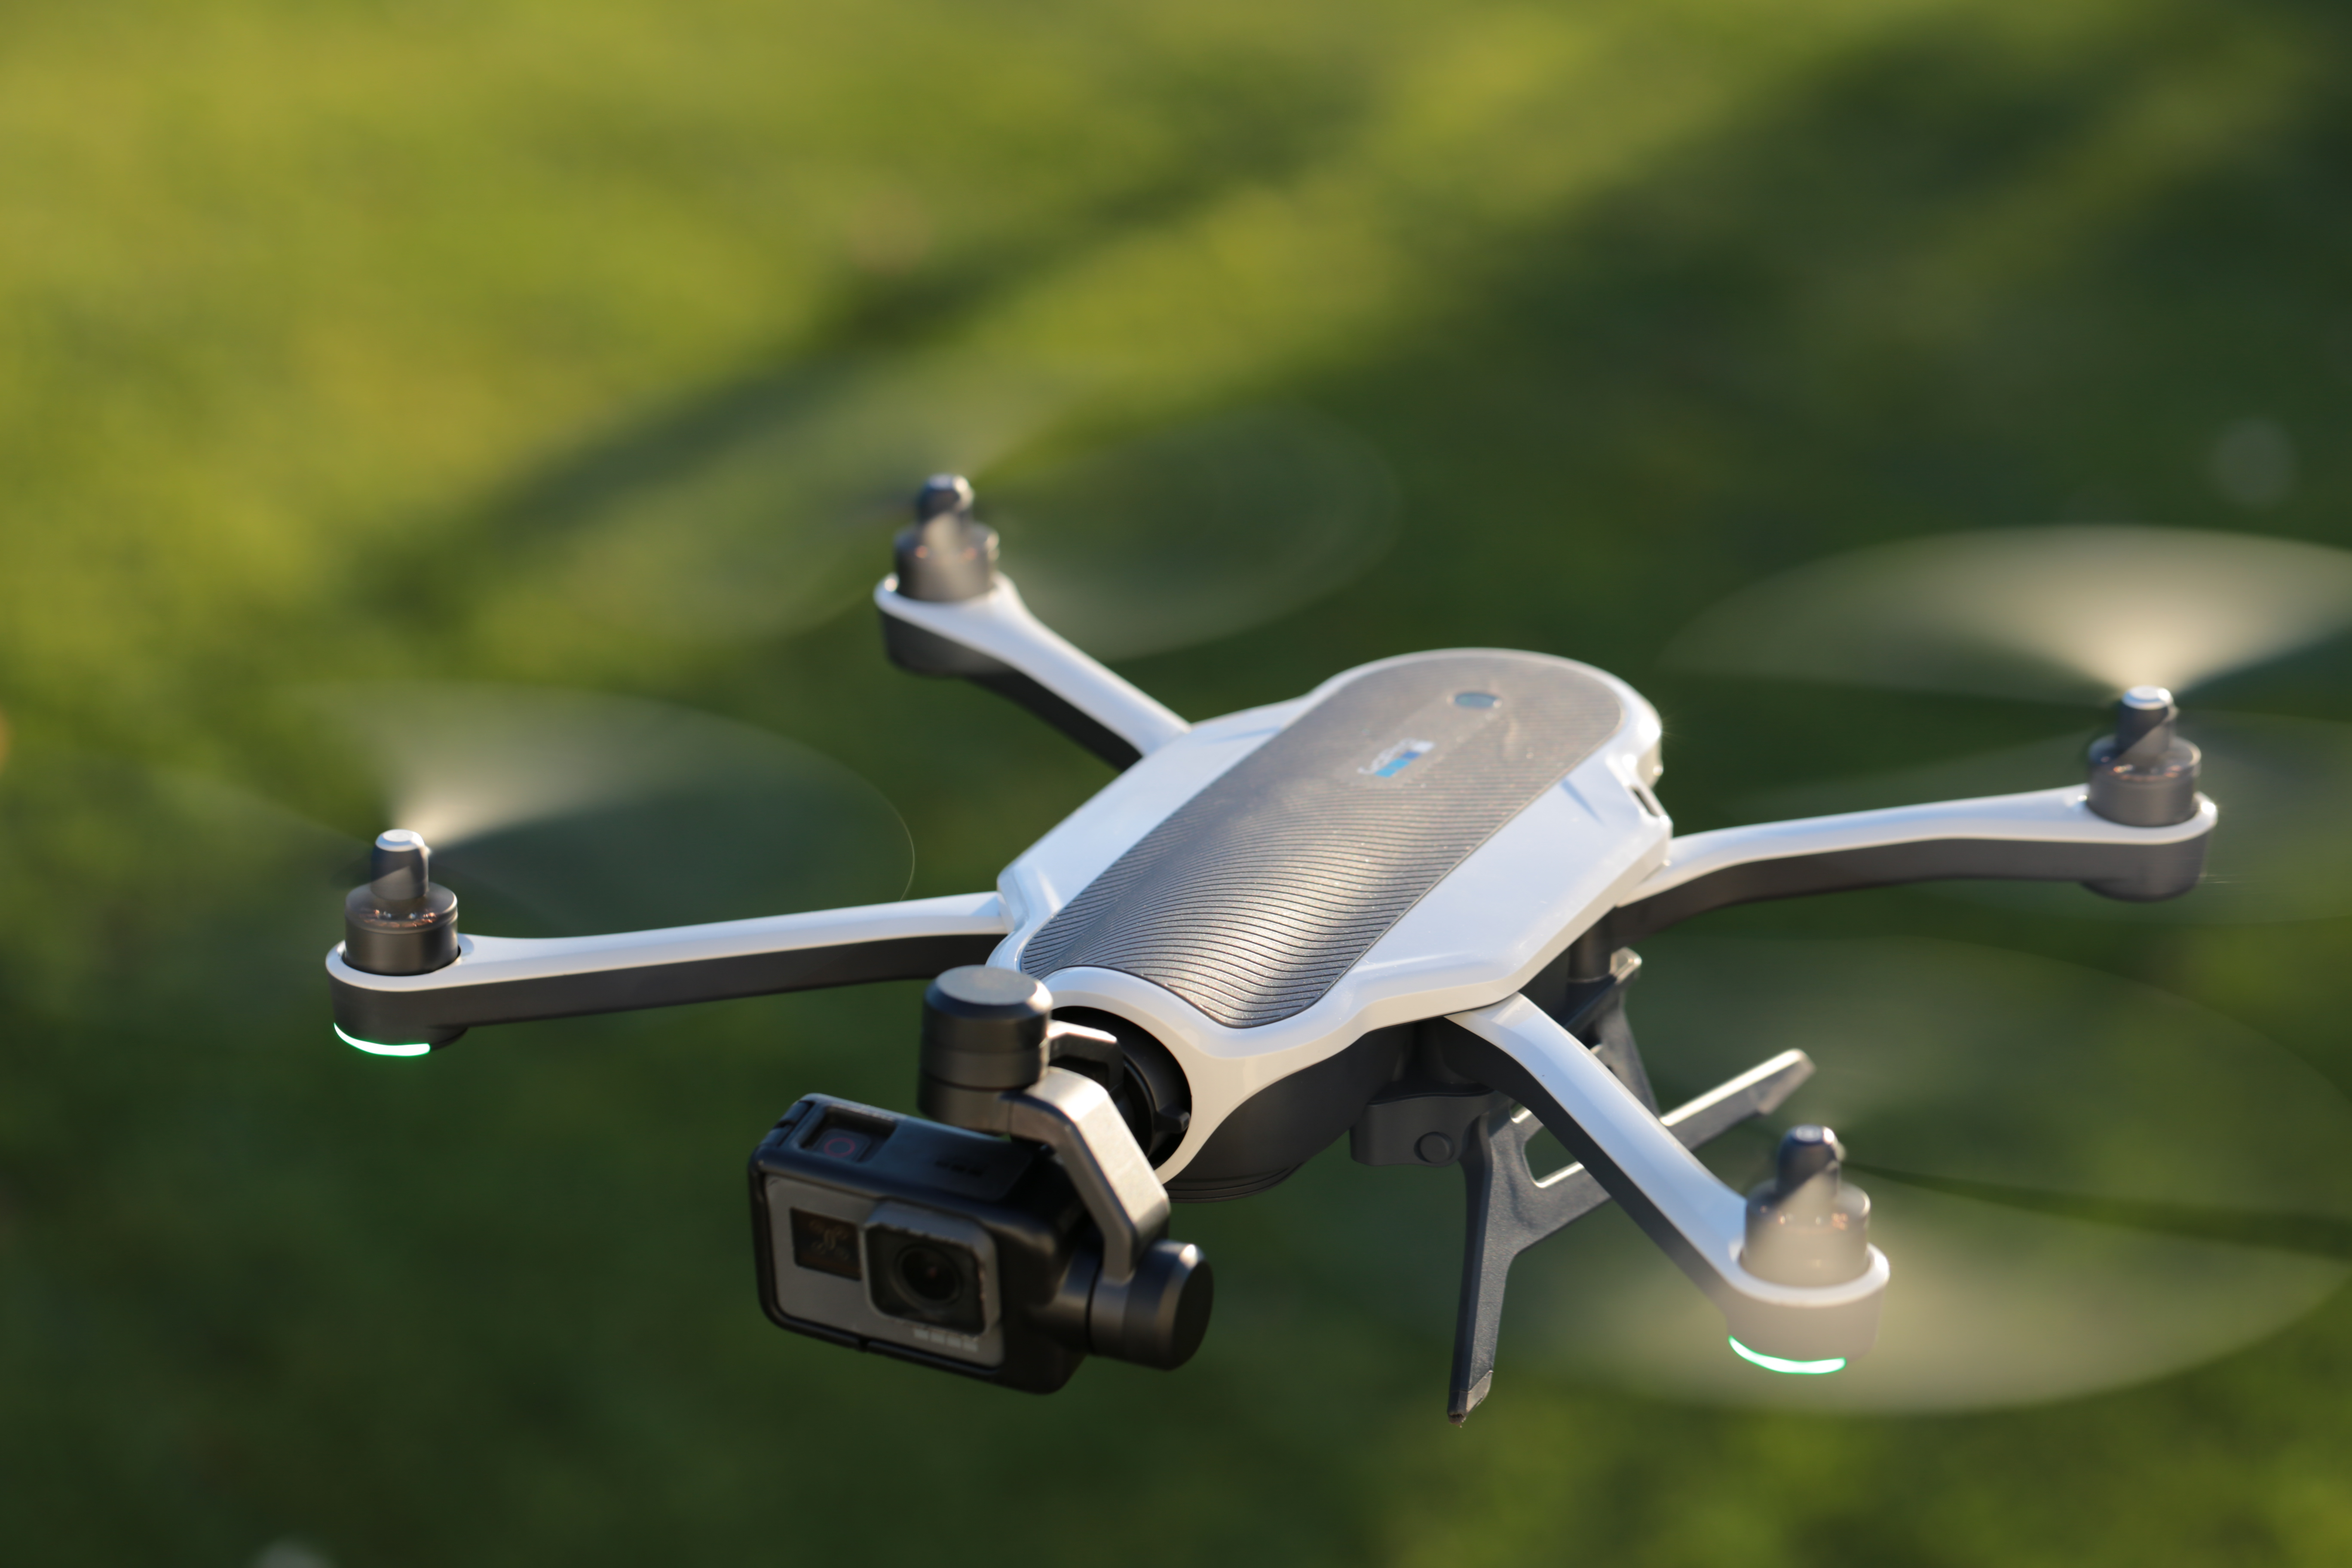 GoPro cuts 200-300 jobs, largely impacting its drone division